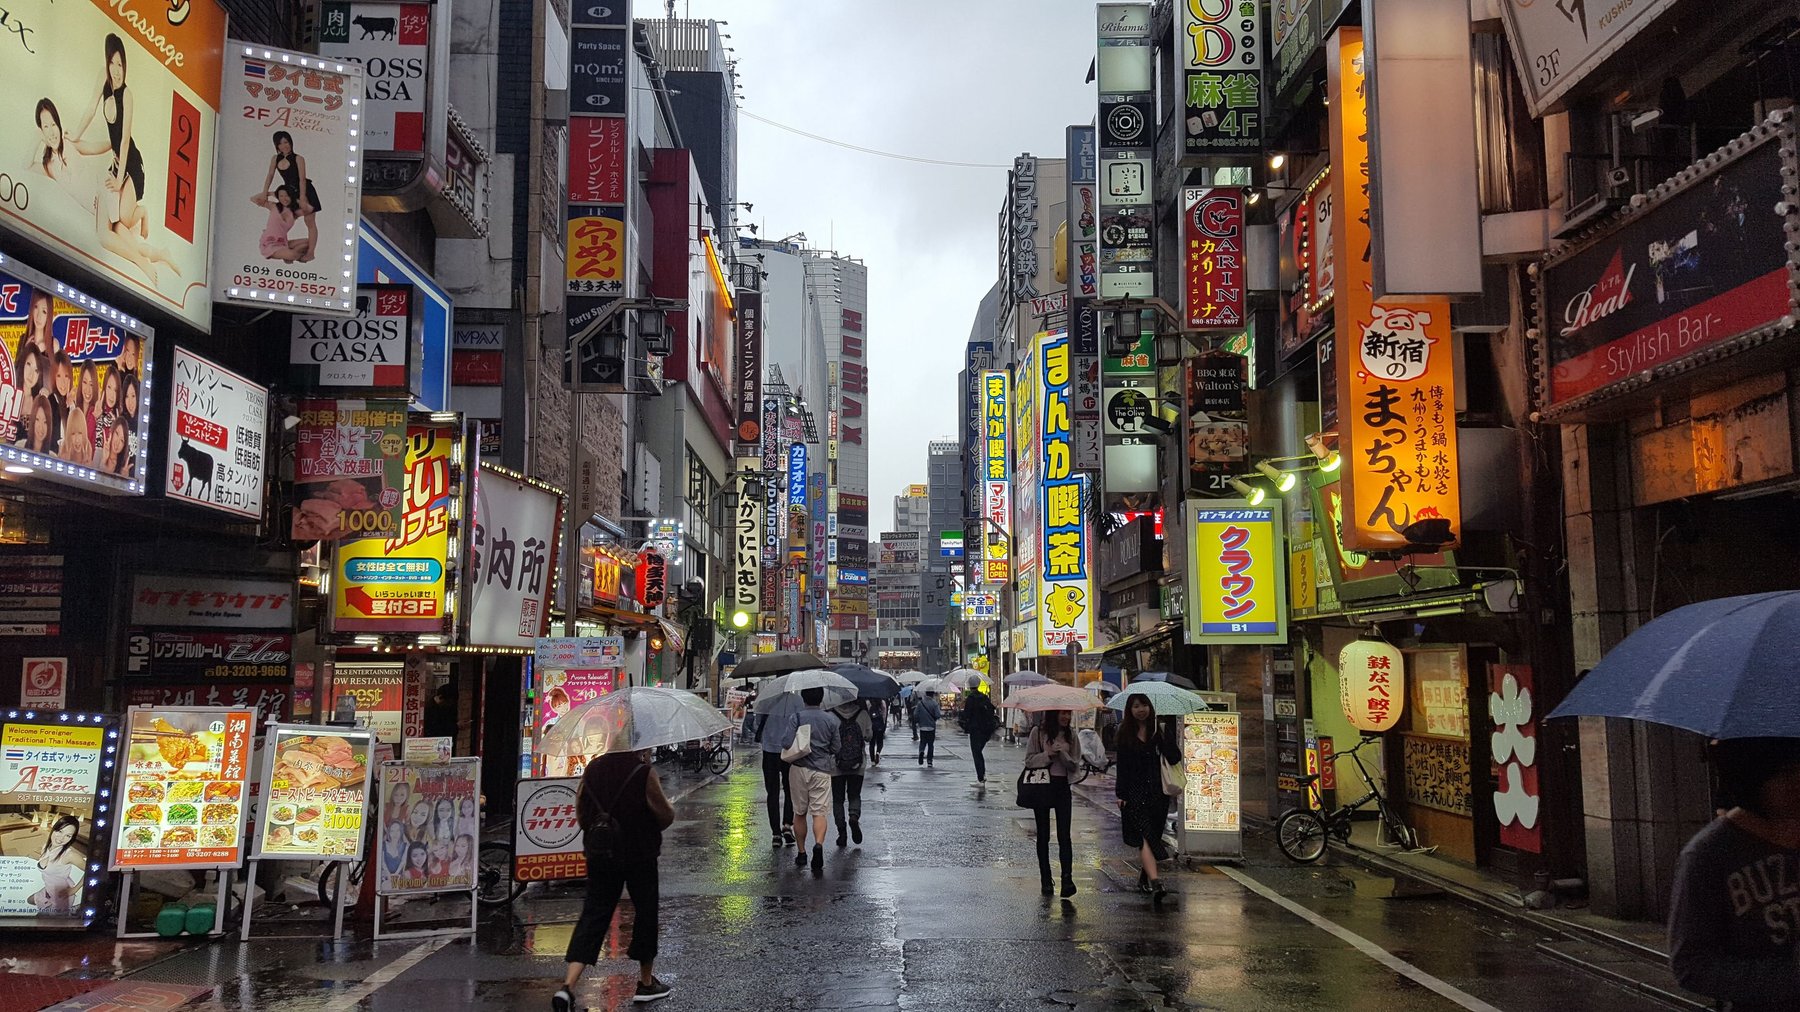 People walking in the rain with umbrellas under bright Japanese shop signs.